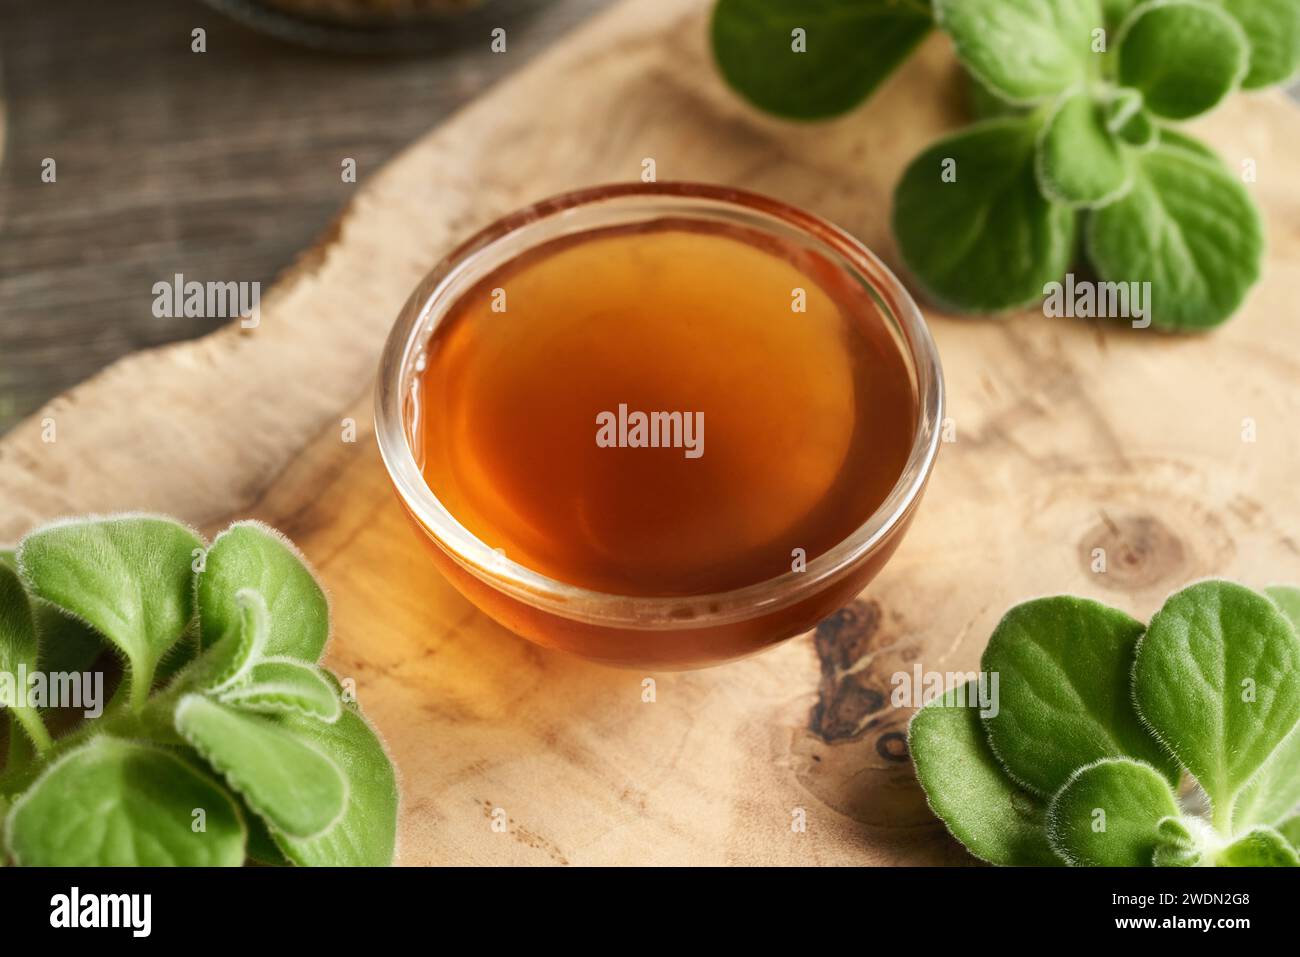 A bowl of homemade Plectranthus amboinicus syrup with fresh leaves Stock Photo